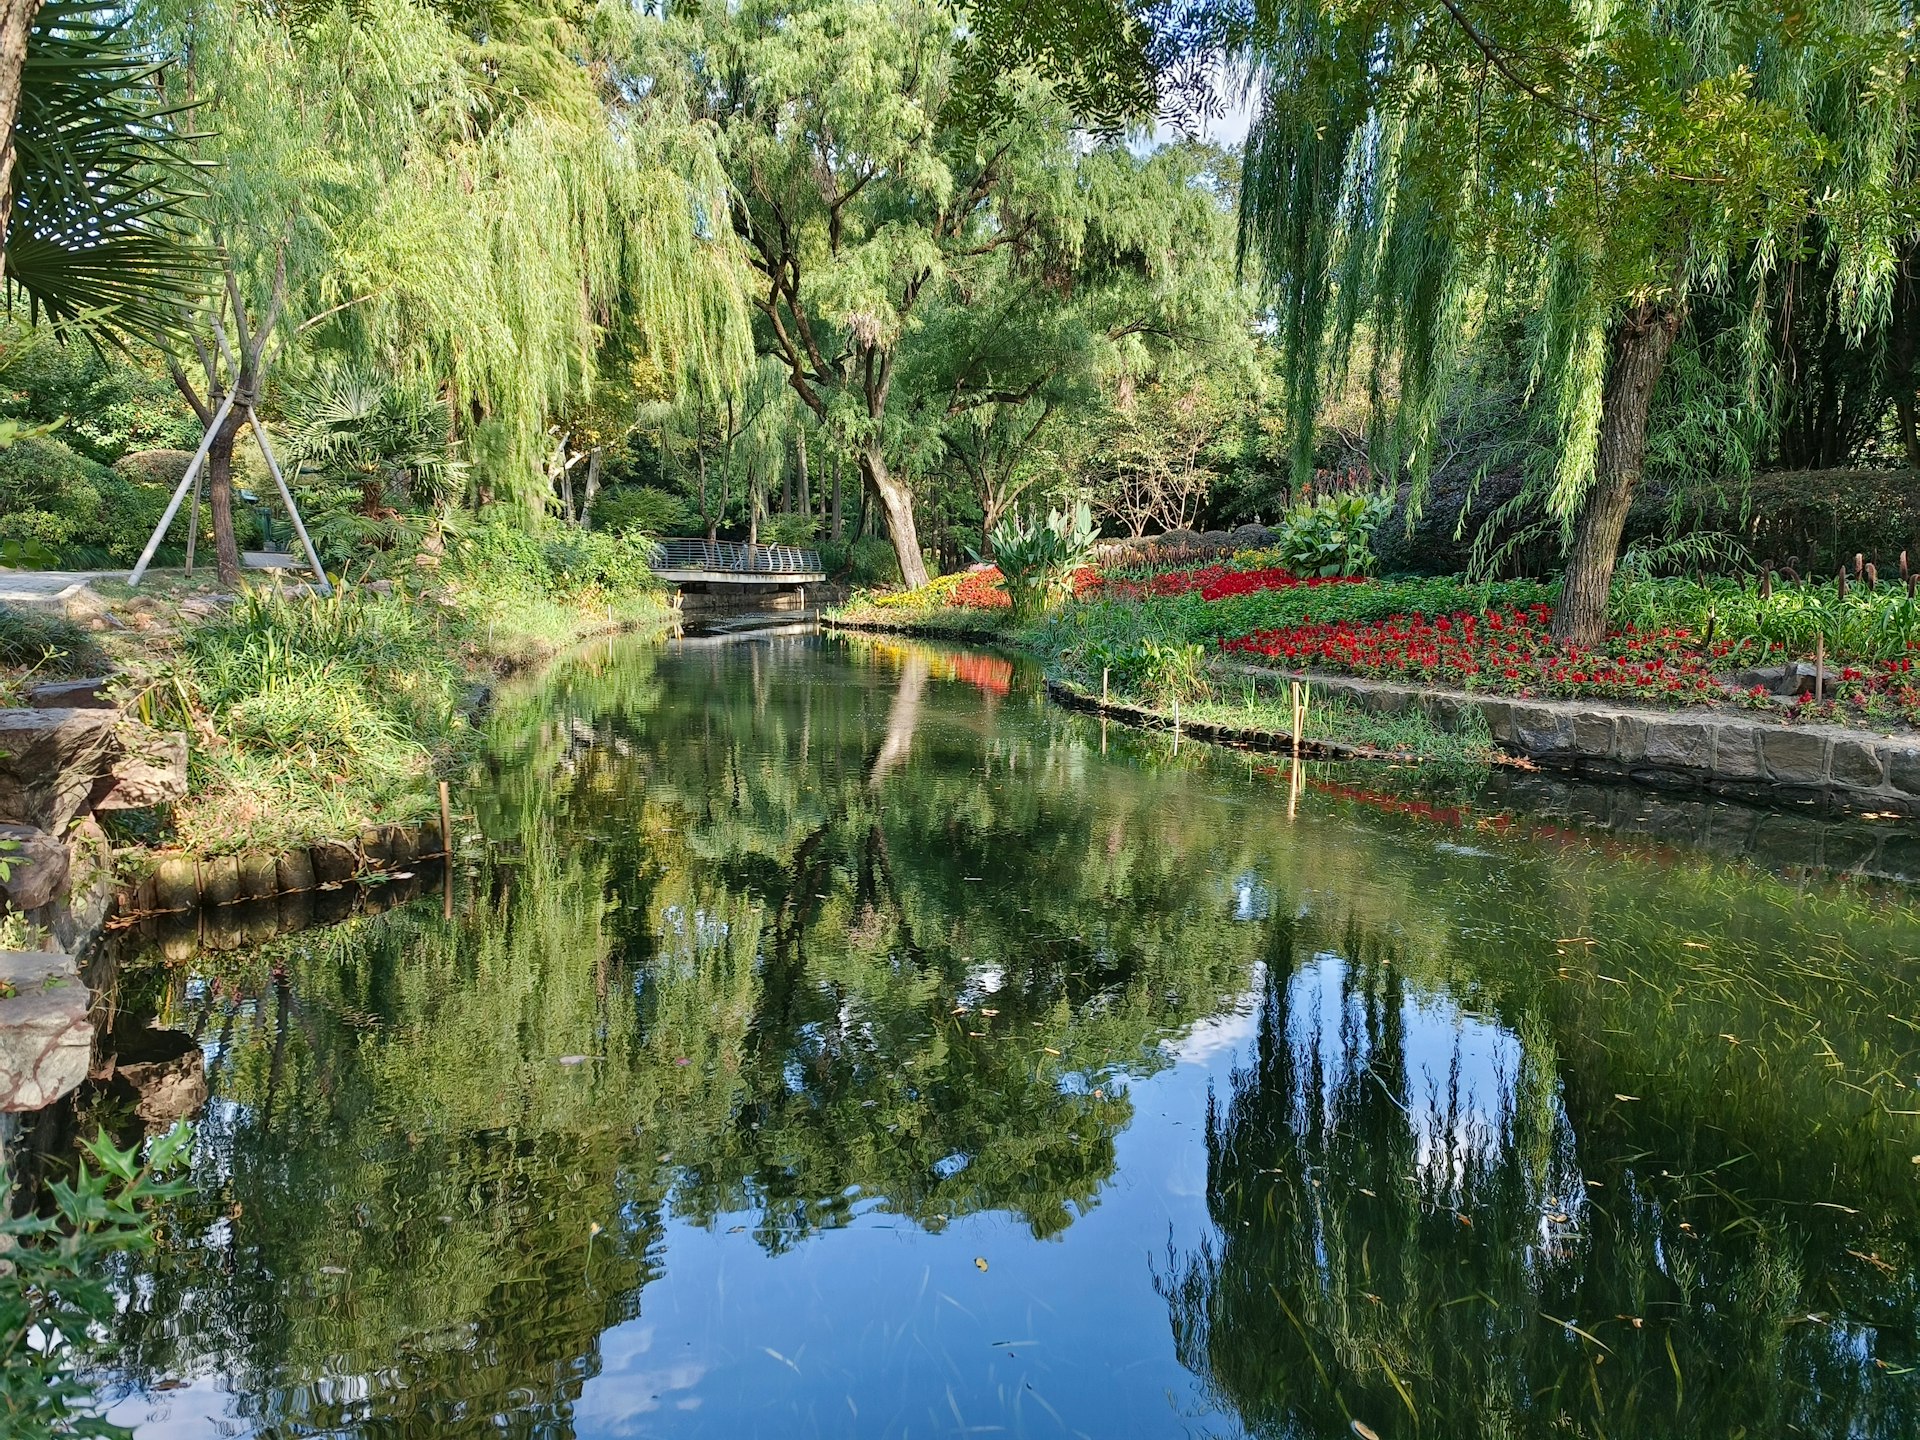 A peaceful, reflective pond situated in China's well-manicured Anji Bamboo Sea garden. The calm water creates mirror-like reflections of the surrounding weeping willows and varied greenery. A bed of bright red flowers adds a pop of color along the pond's edge, enhancing the tranquil and natural beauty of the scene.